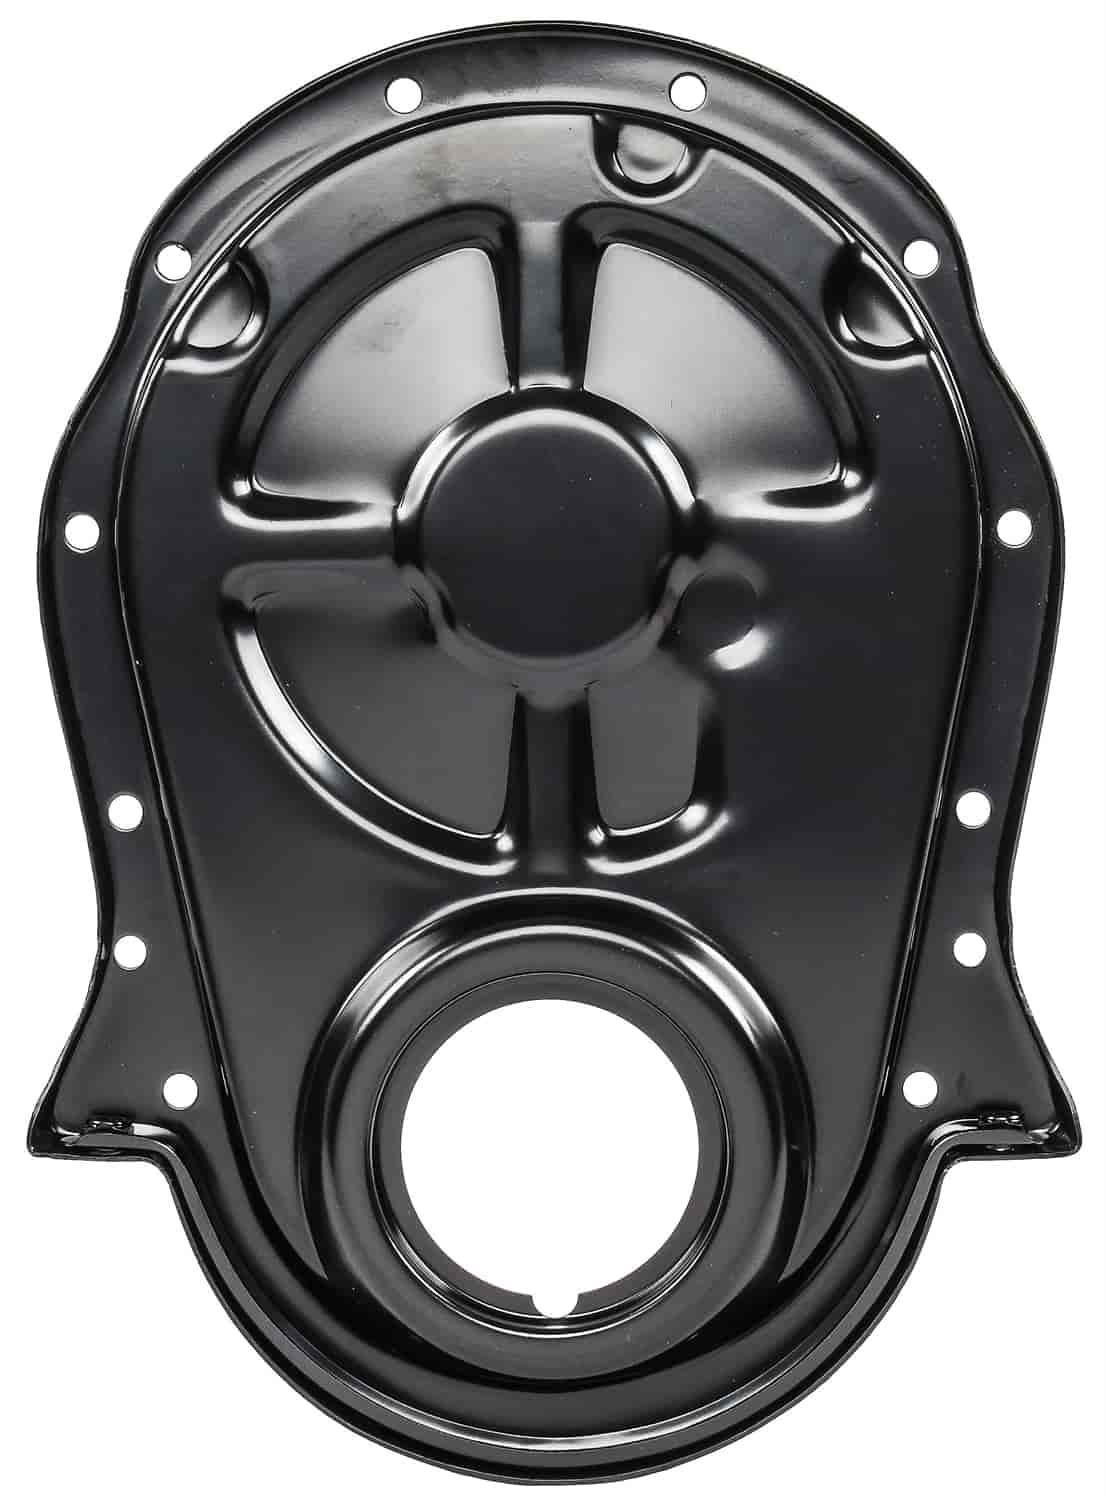 JEGS 50332: Timing Cover for 1966-1990 Big Block Chevy Mark IV 396, 402,  427, 454 [Black] JEGS